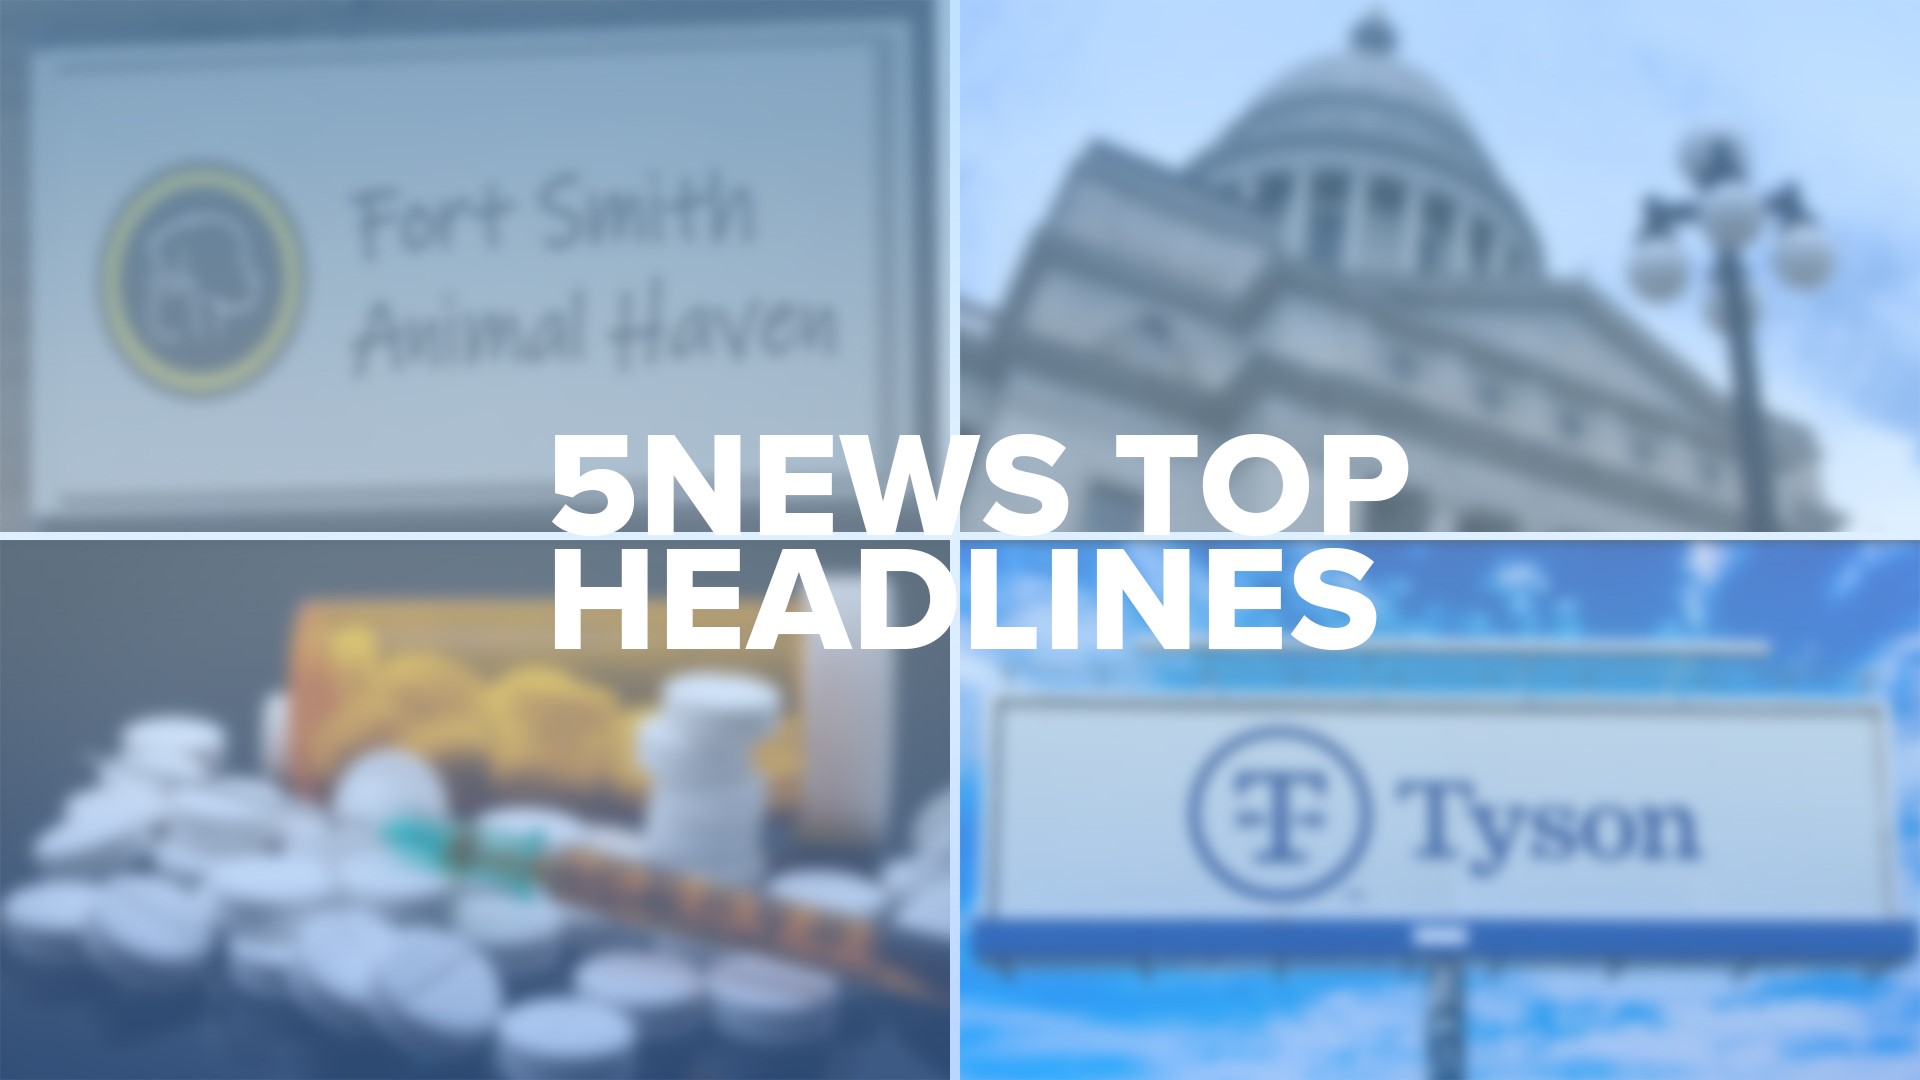 Check out today's headlines for local news across our area.